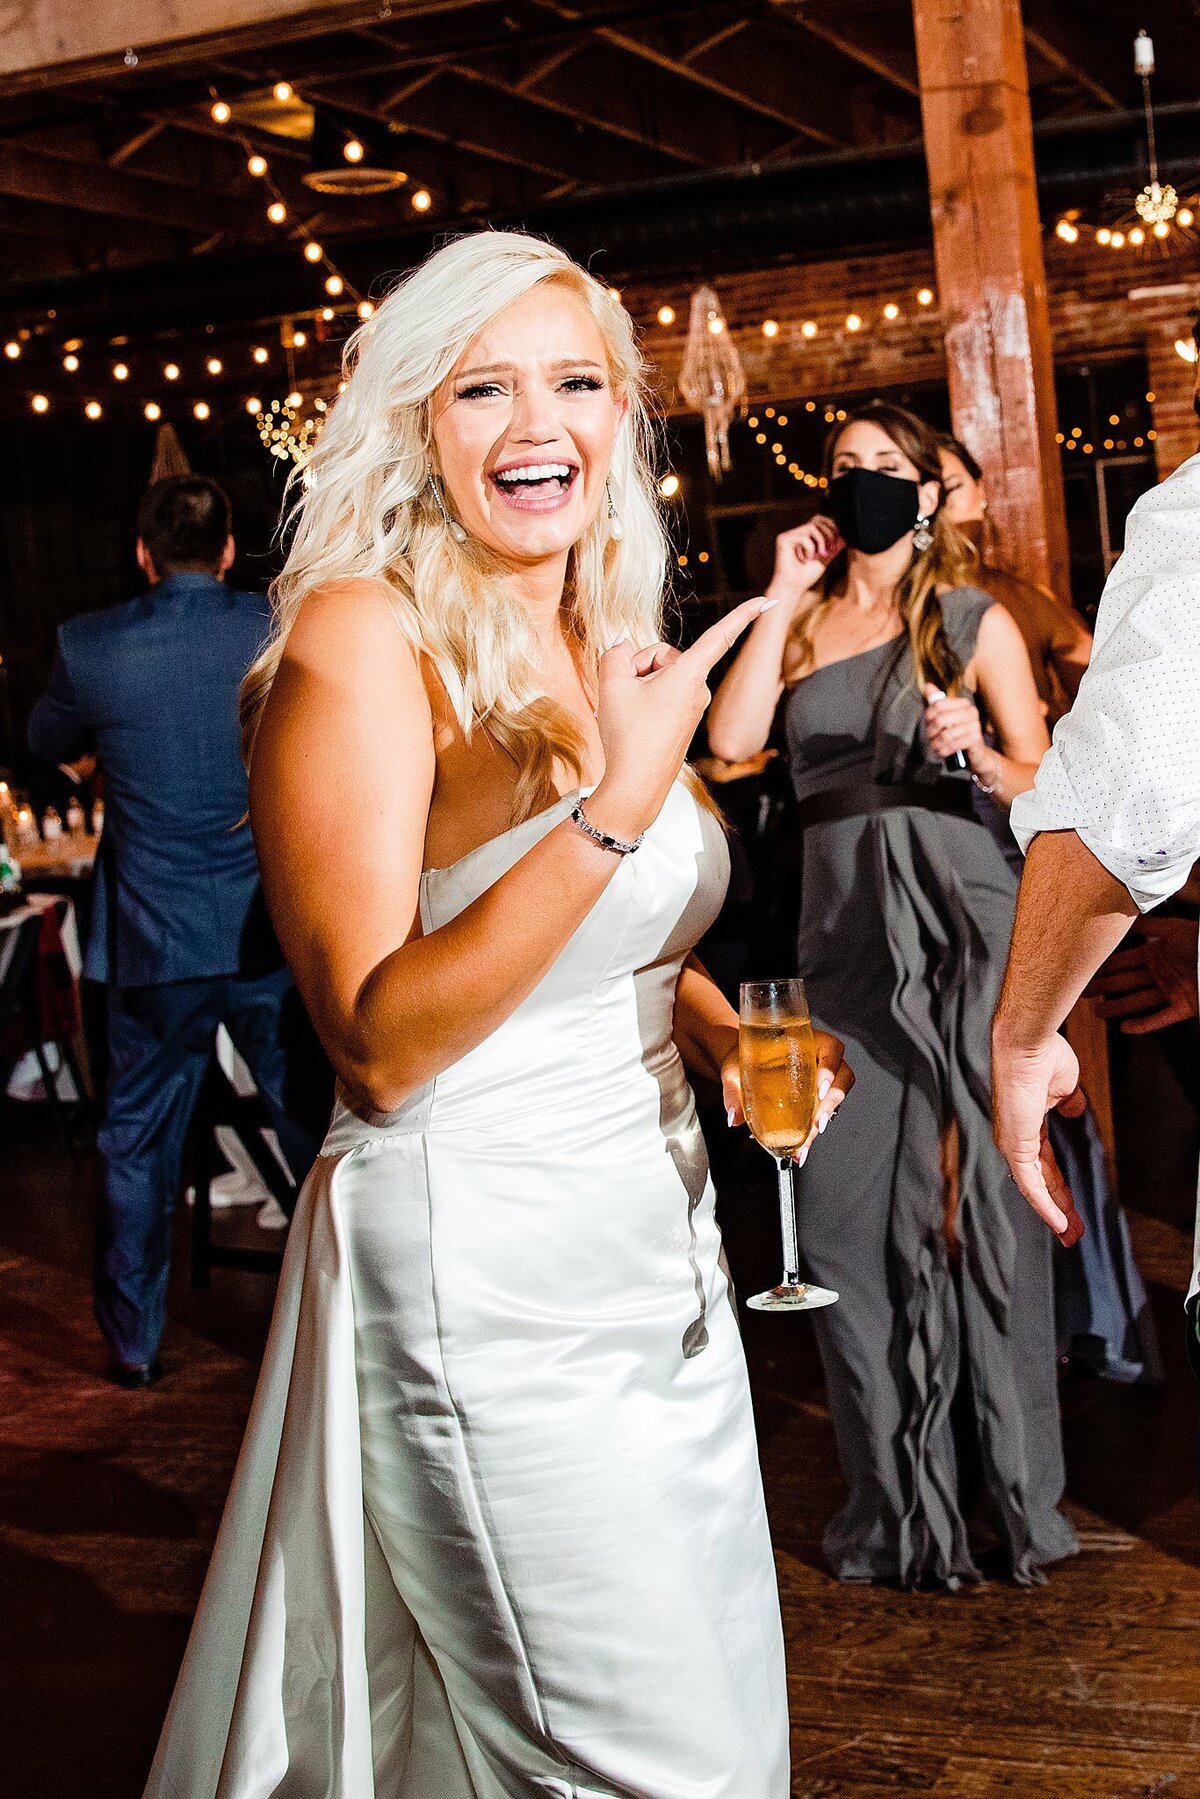 Bride laughing candidly on the dance floor holding a glass of wine